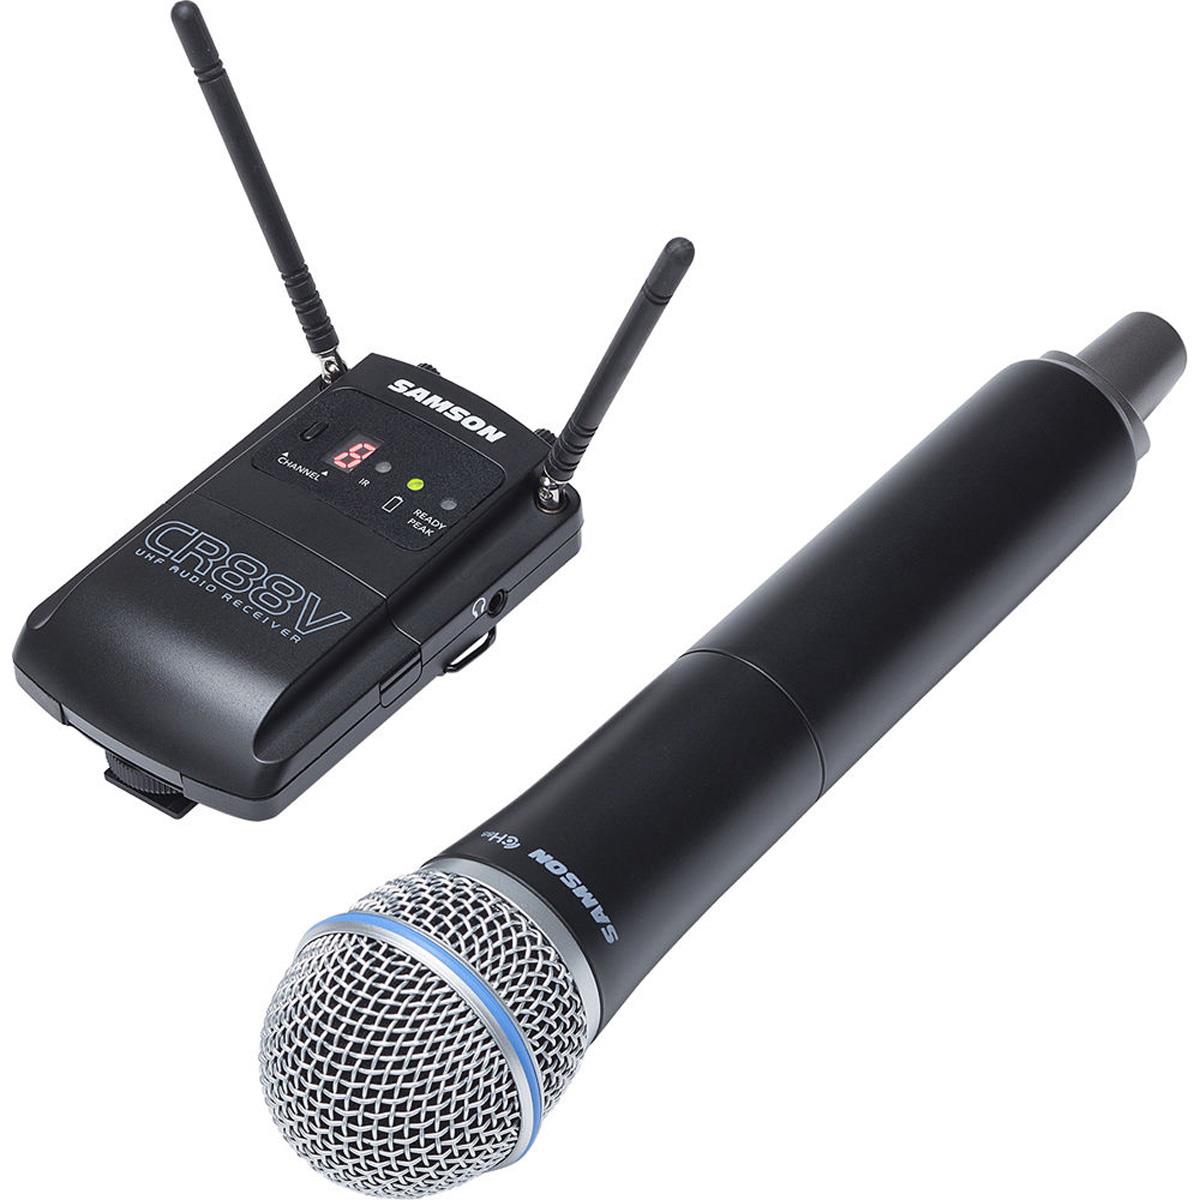 Samson Concert 88 Camera Frequency-Agile UHF Wireless Handheld Microphone System -  SWC88XVHQ8-D